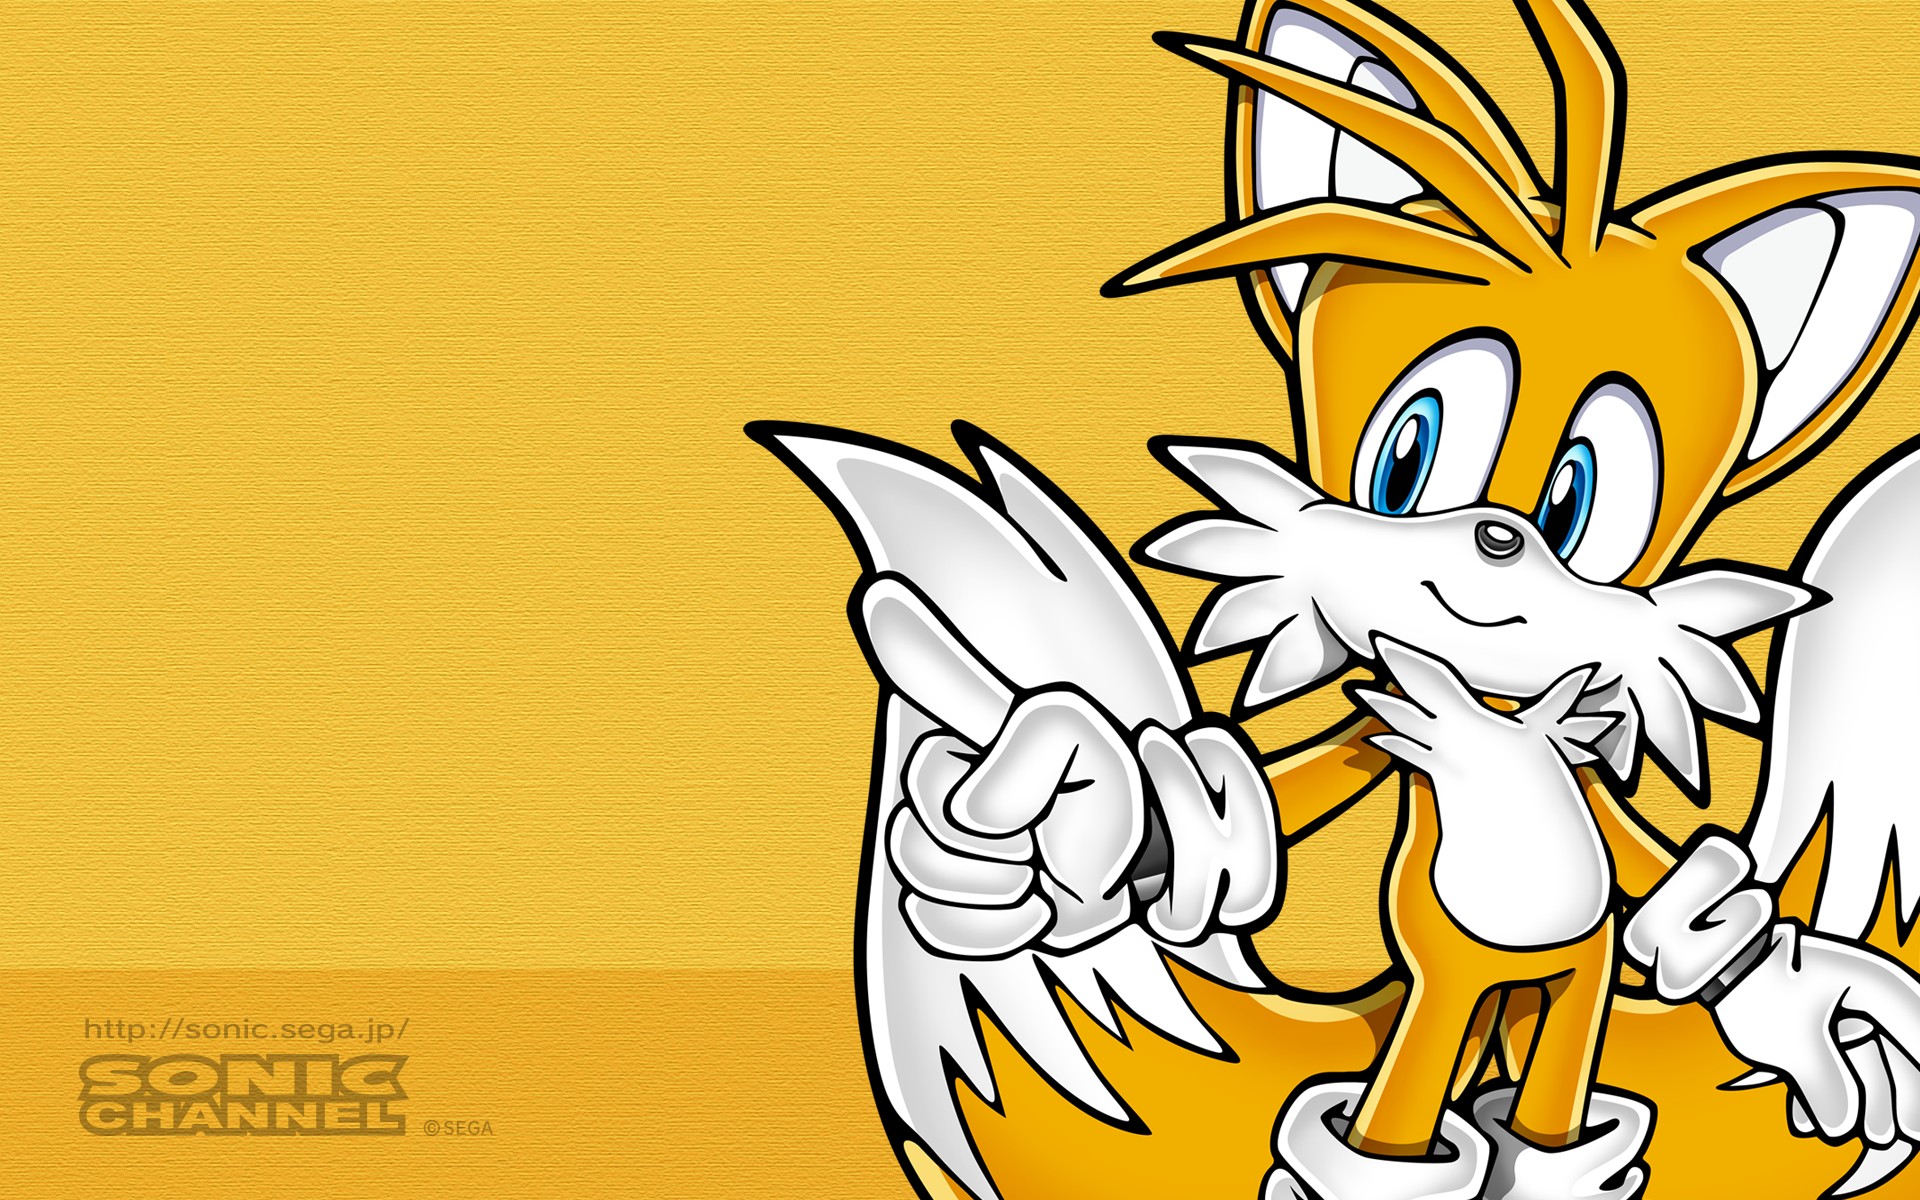 Tails Wallpapers.